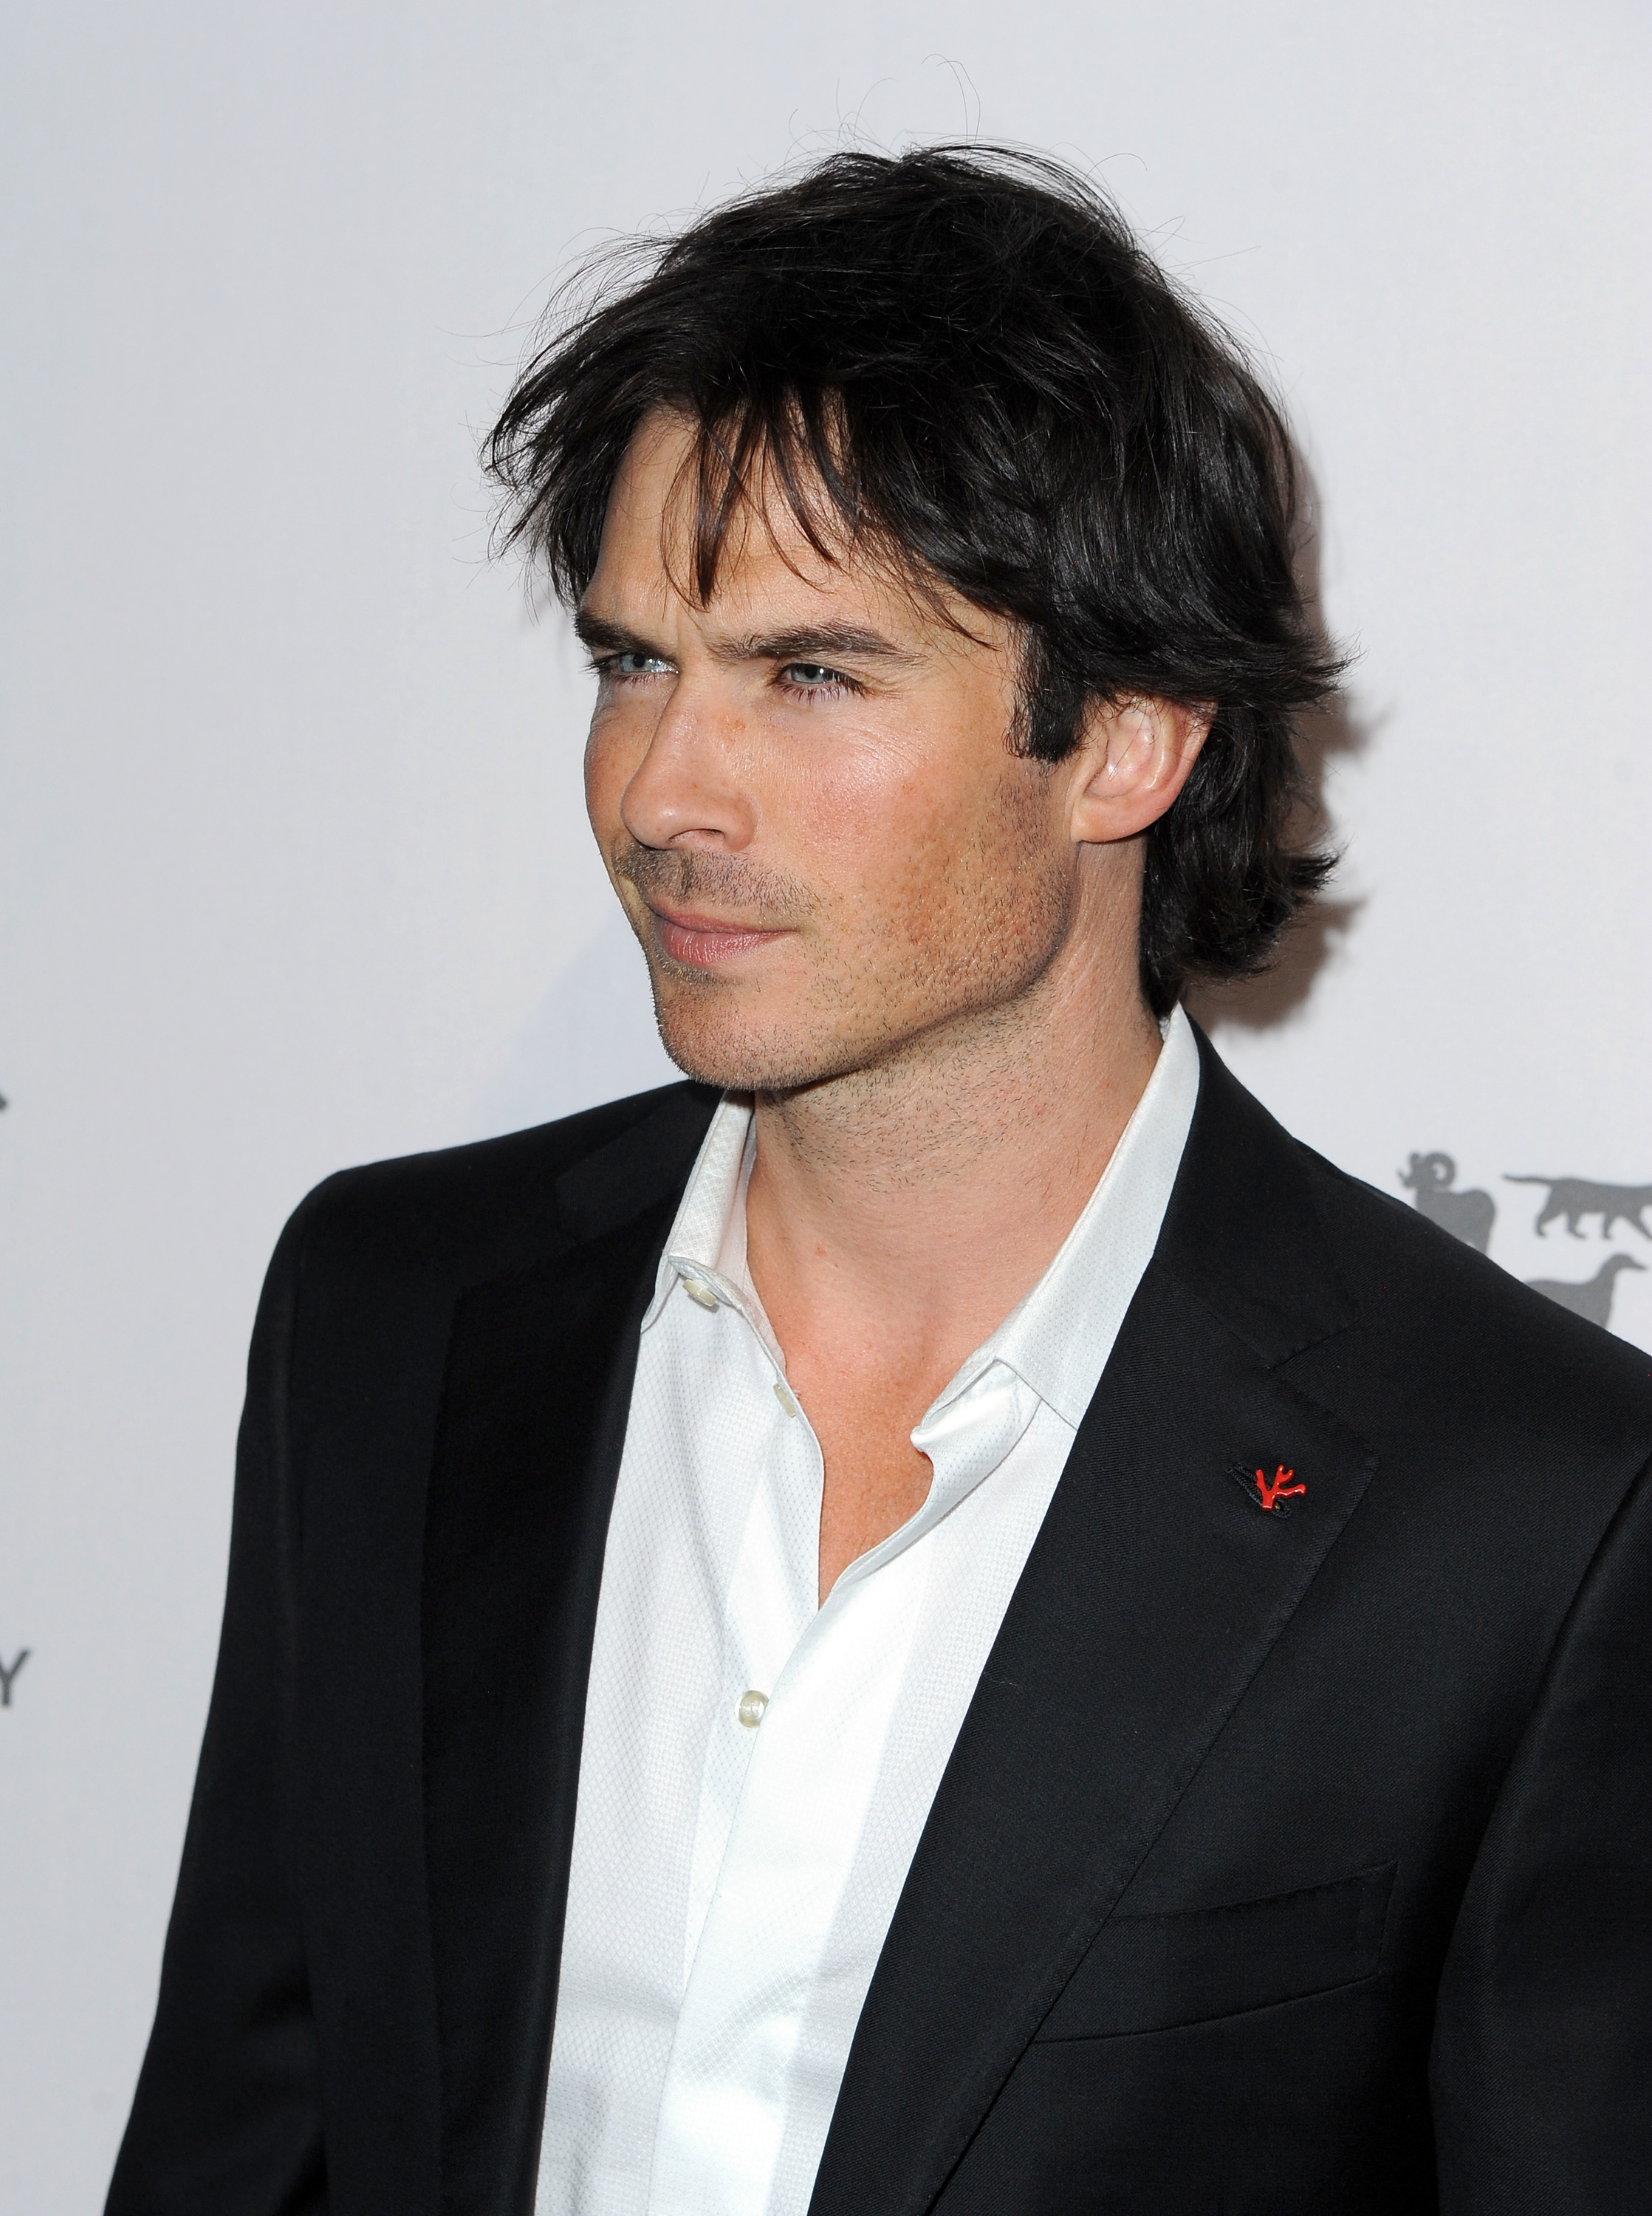 HOLLYWOOD, CA - MAY 07: Actor Ian Somerhalder attends The Humane Society of the United States' to the Rescue Gala at Paramount Studios on May 7, 2016 in Hollywood, California. (Photo by Angela Weiss/Getty Images for The Humane Society Of The United State )